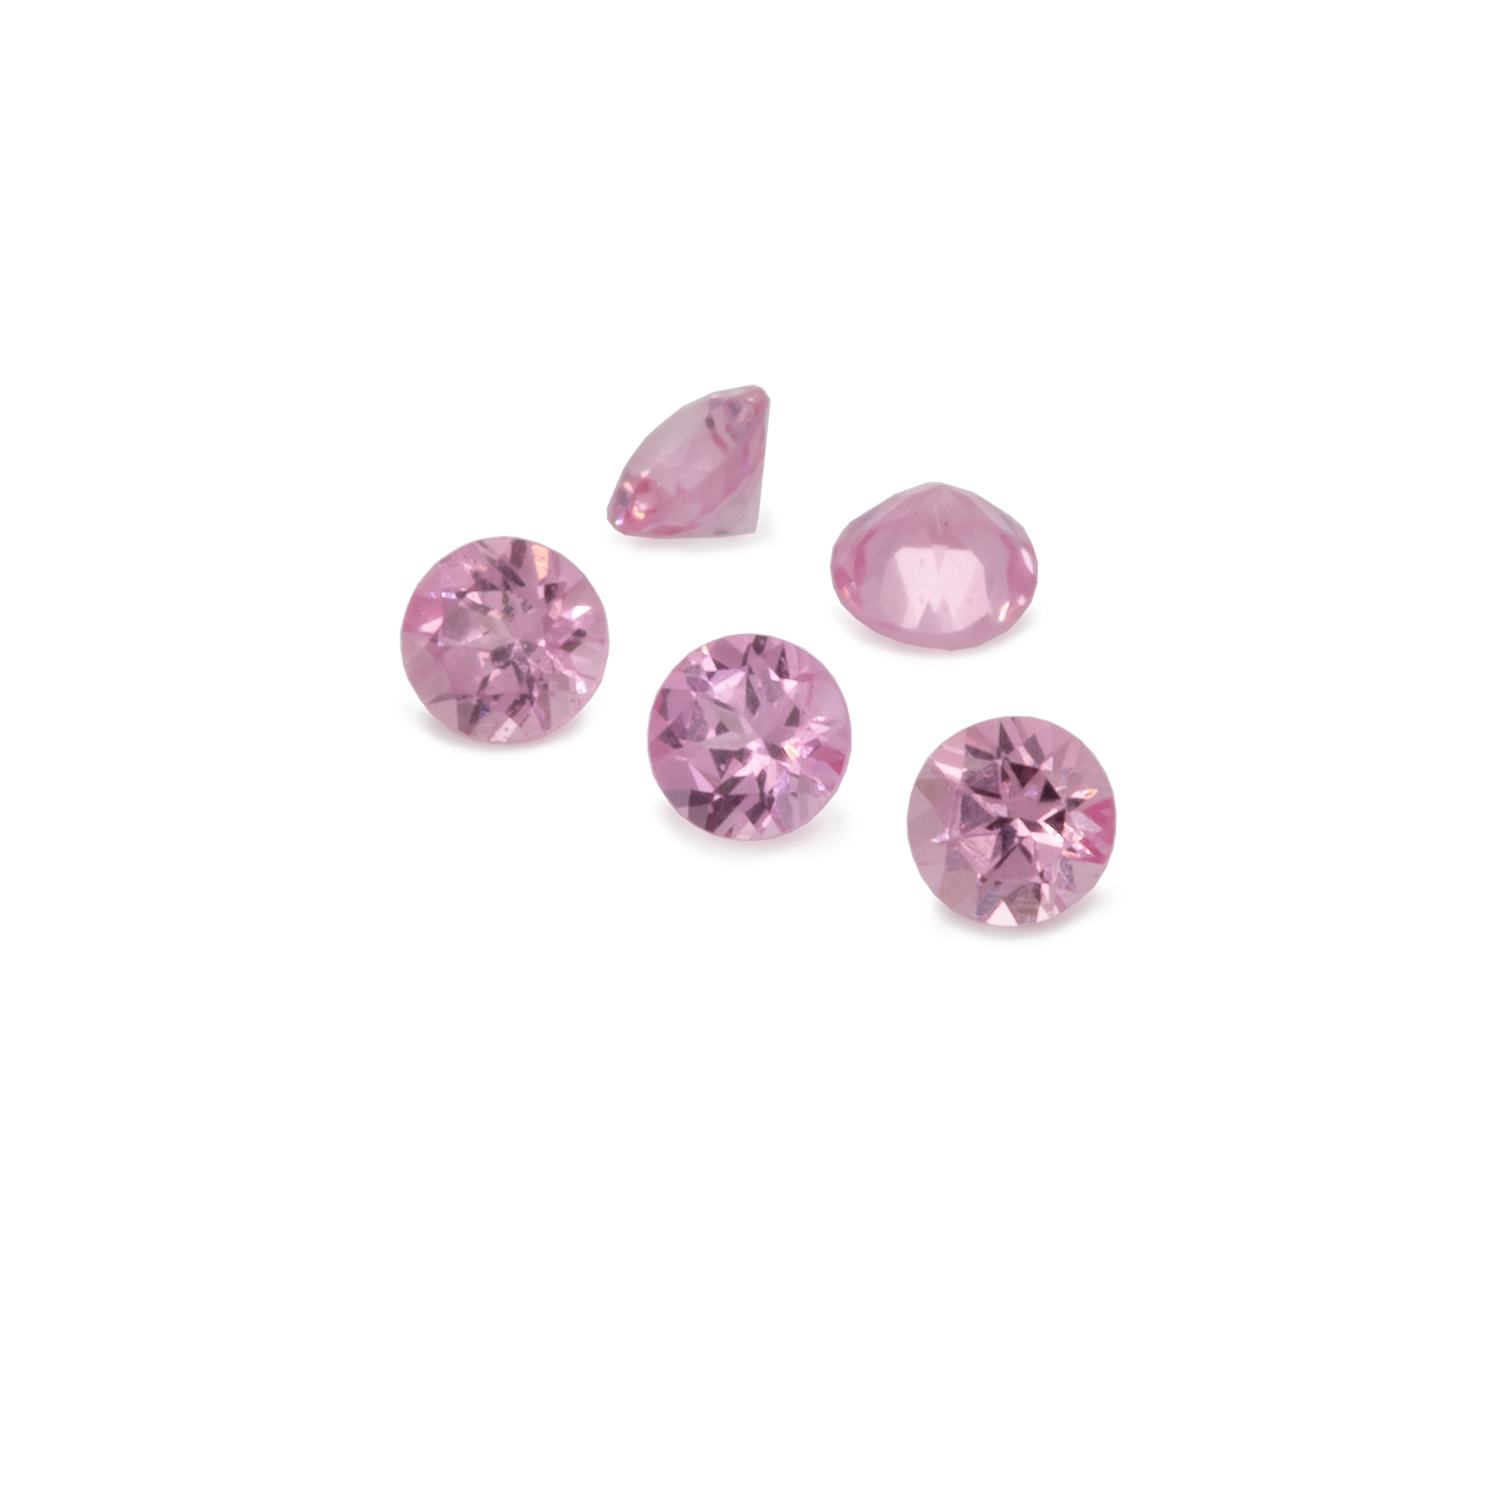 Spinell - rosa, rund, 1,6x1,6 mm, ca. 0,01 cts, Nr. SP81001